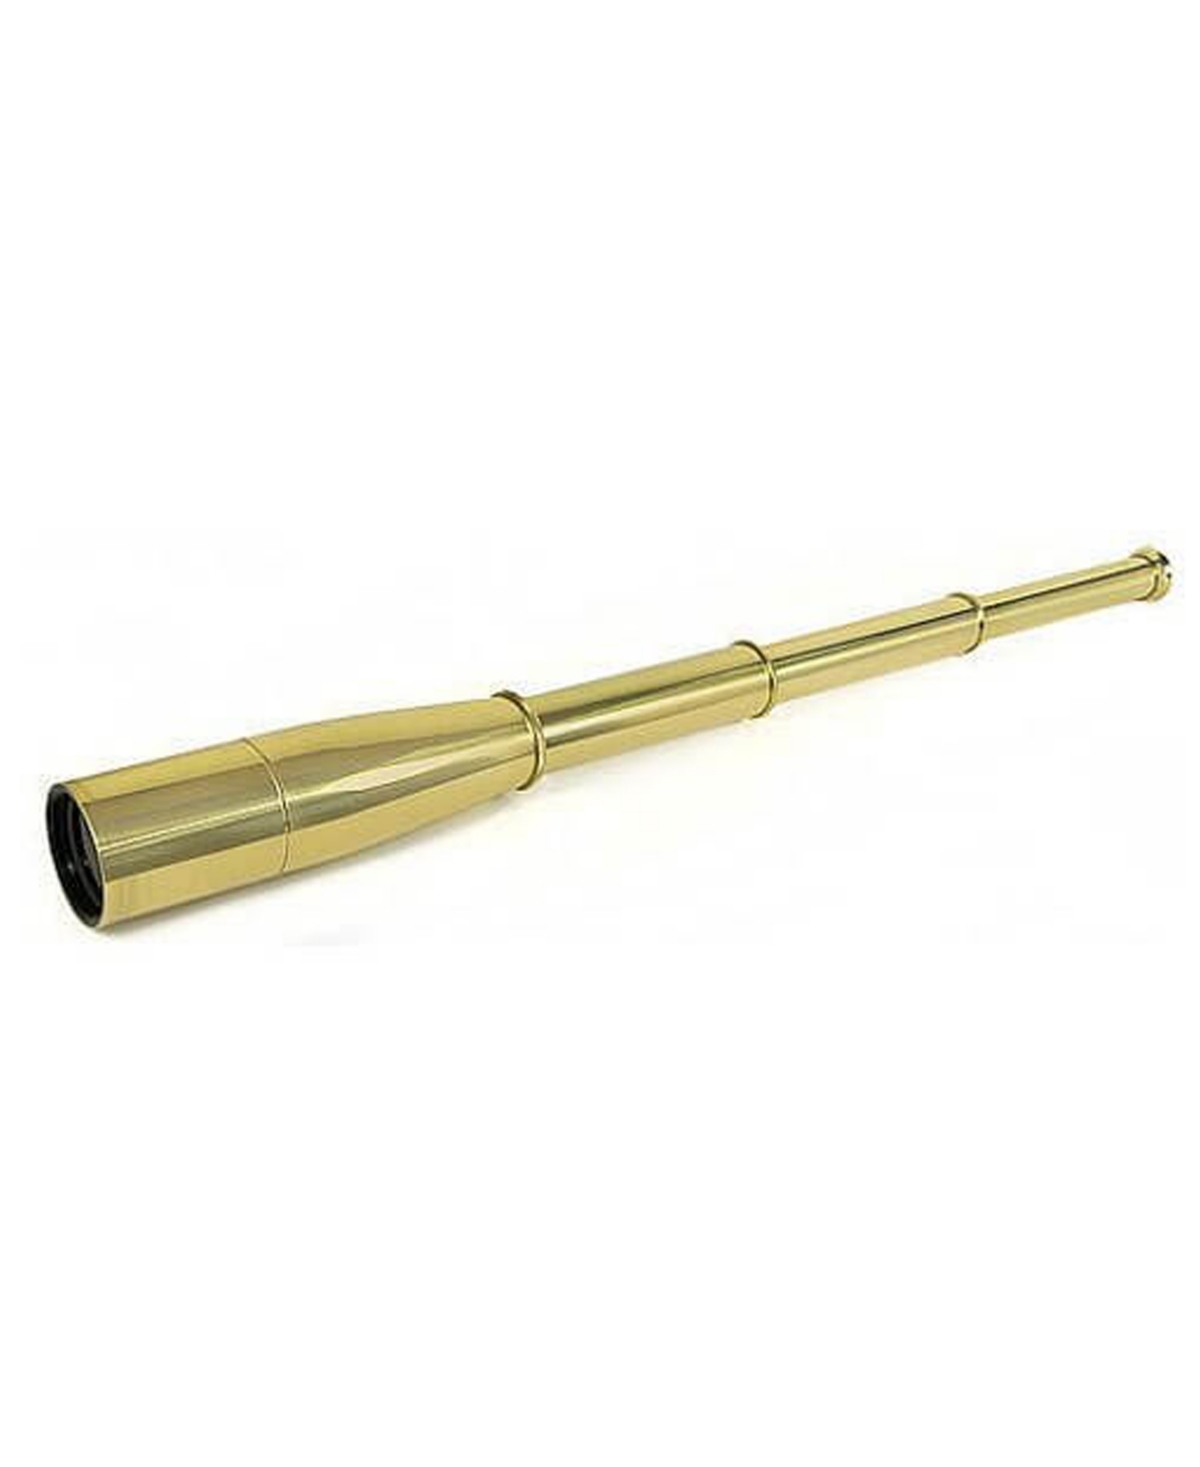 Shop Barska 18x50mm Collapsible Anchormaster Classic Brass Spyscope, Anchormaster With Storage Chest